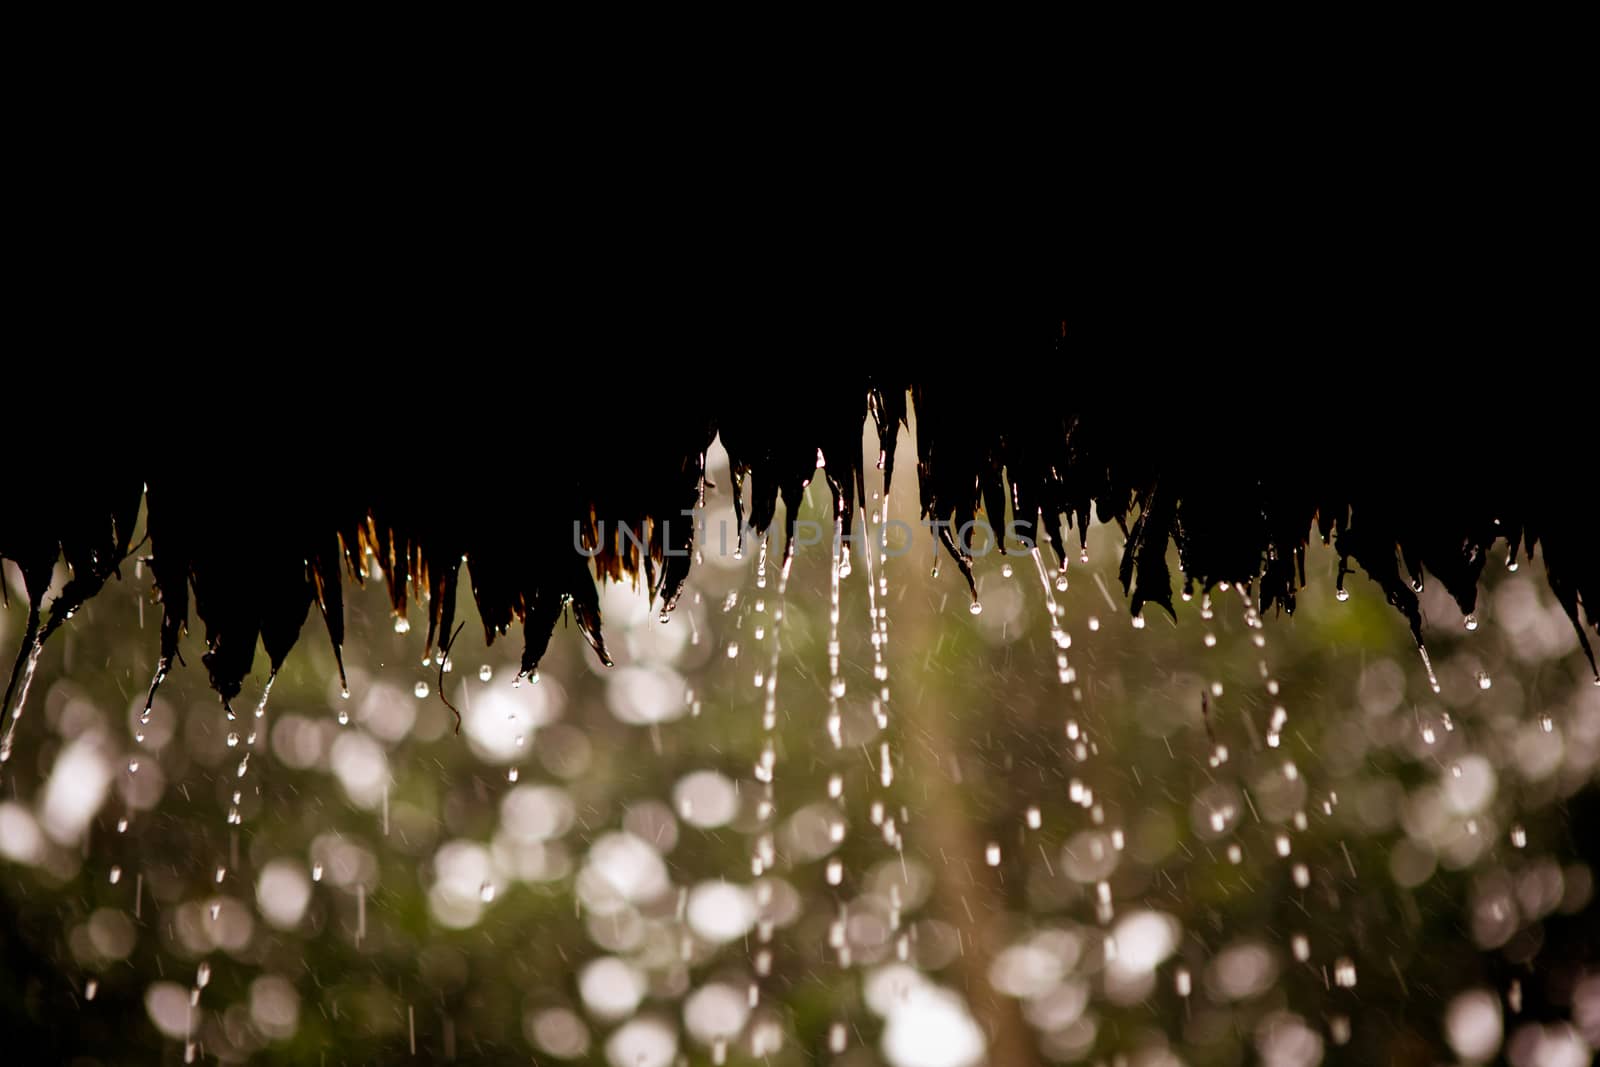 Falling rain drops sparkling as they enter the light on a dark night outdoors with copyspace